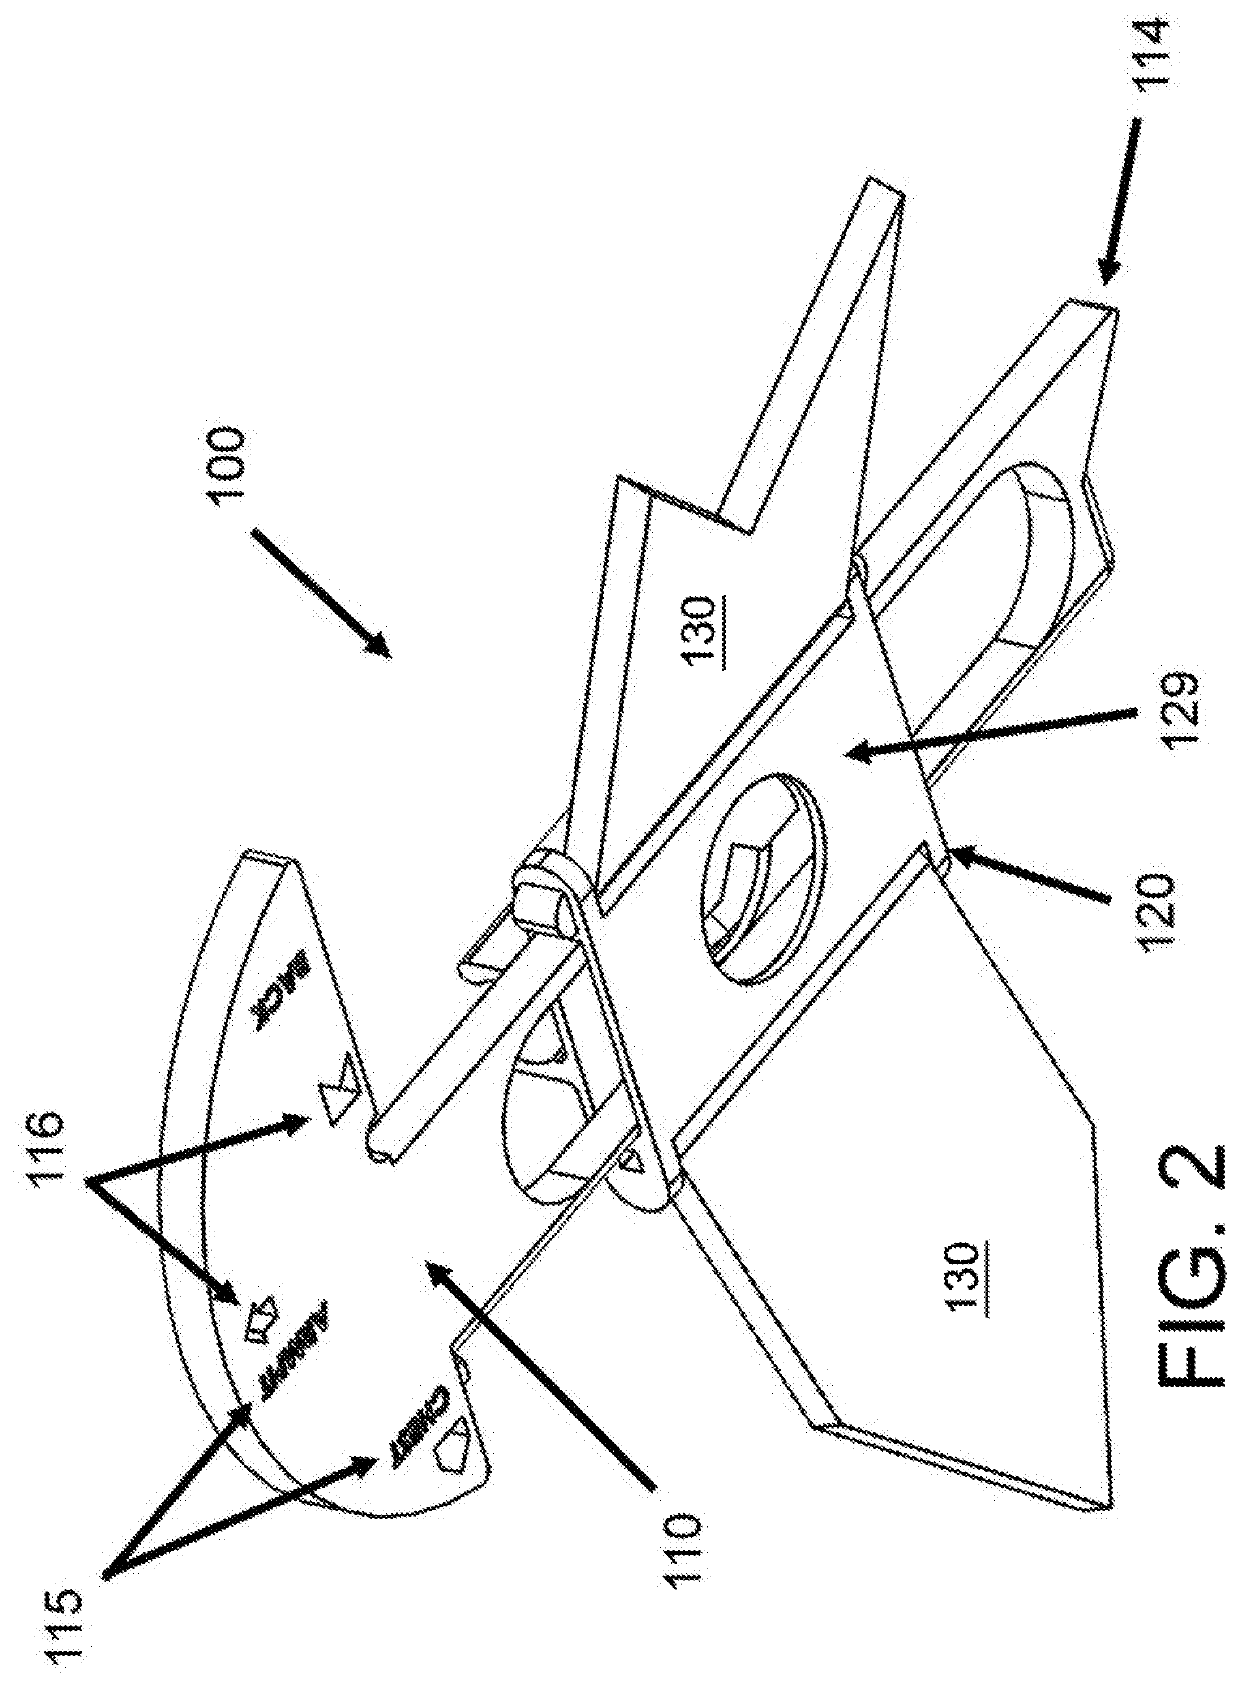 Device for medical procedure localization and/or insertion